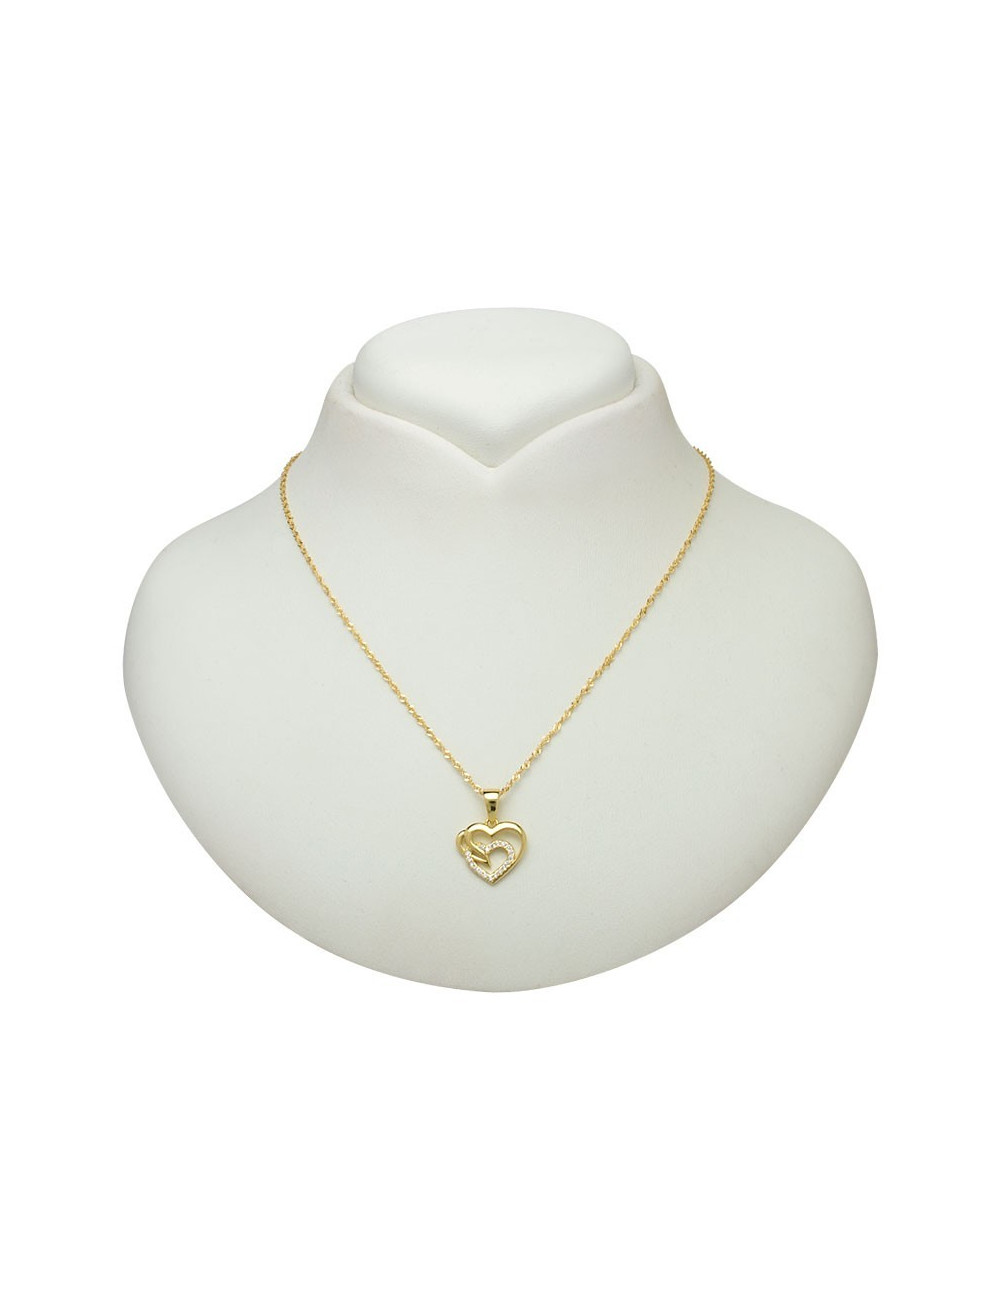 Gold-plated silver chain with pendant in the shape of two hearts, one decorated with zircons LAN455S